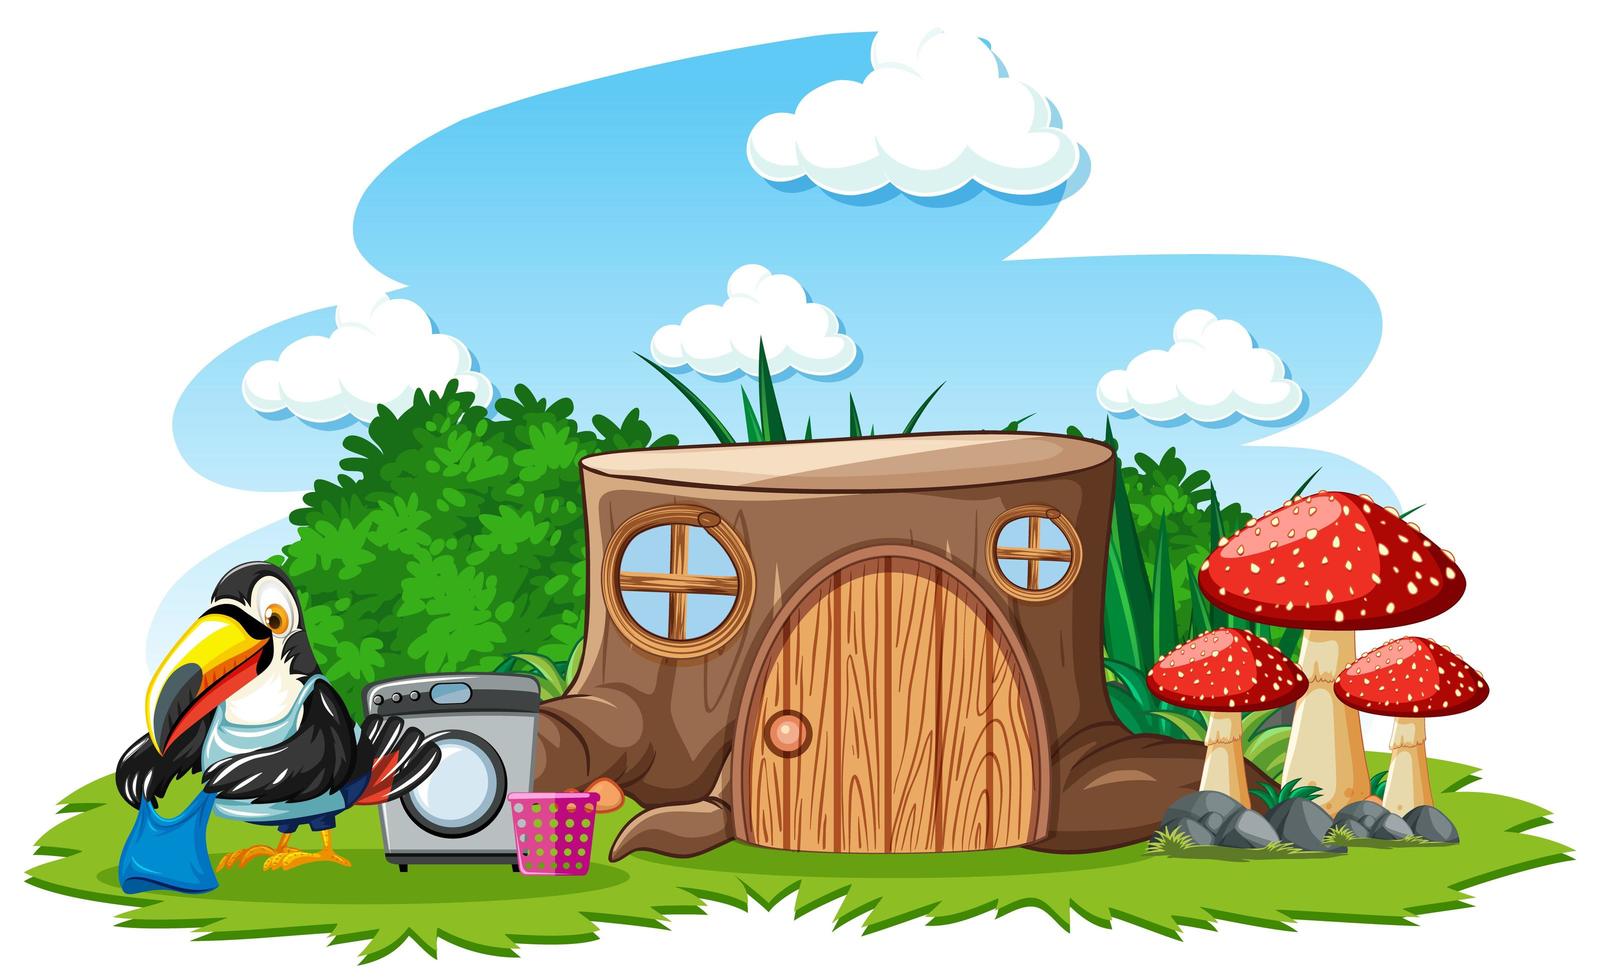 Stump house with cute bird cartoon style on white background vector